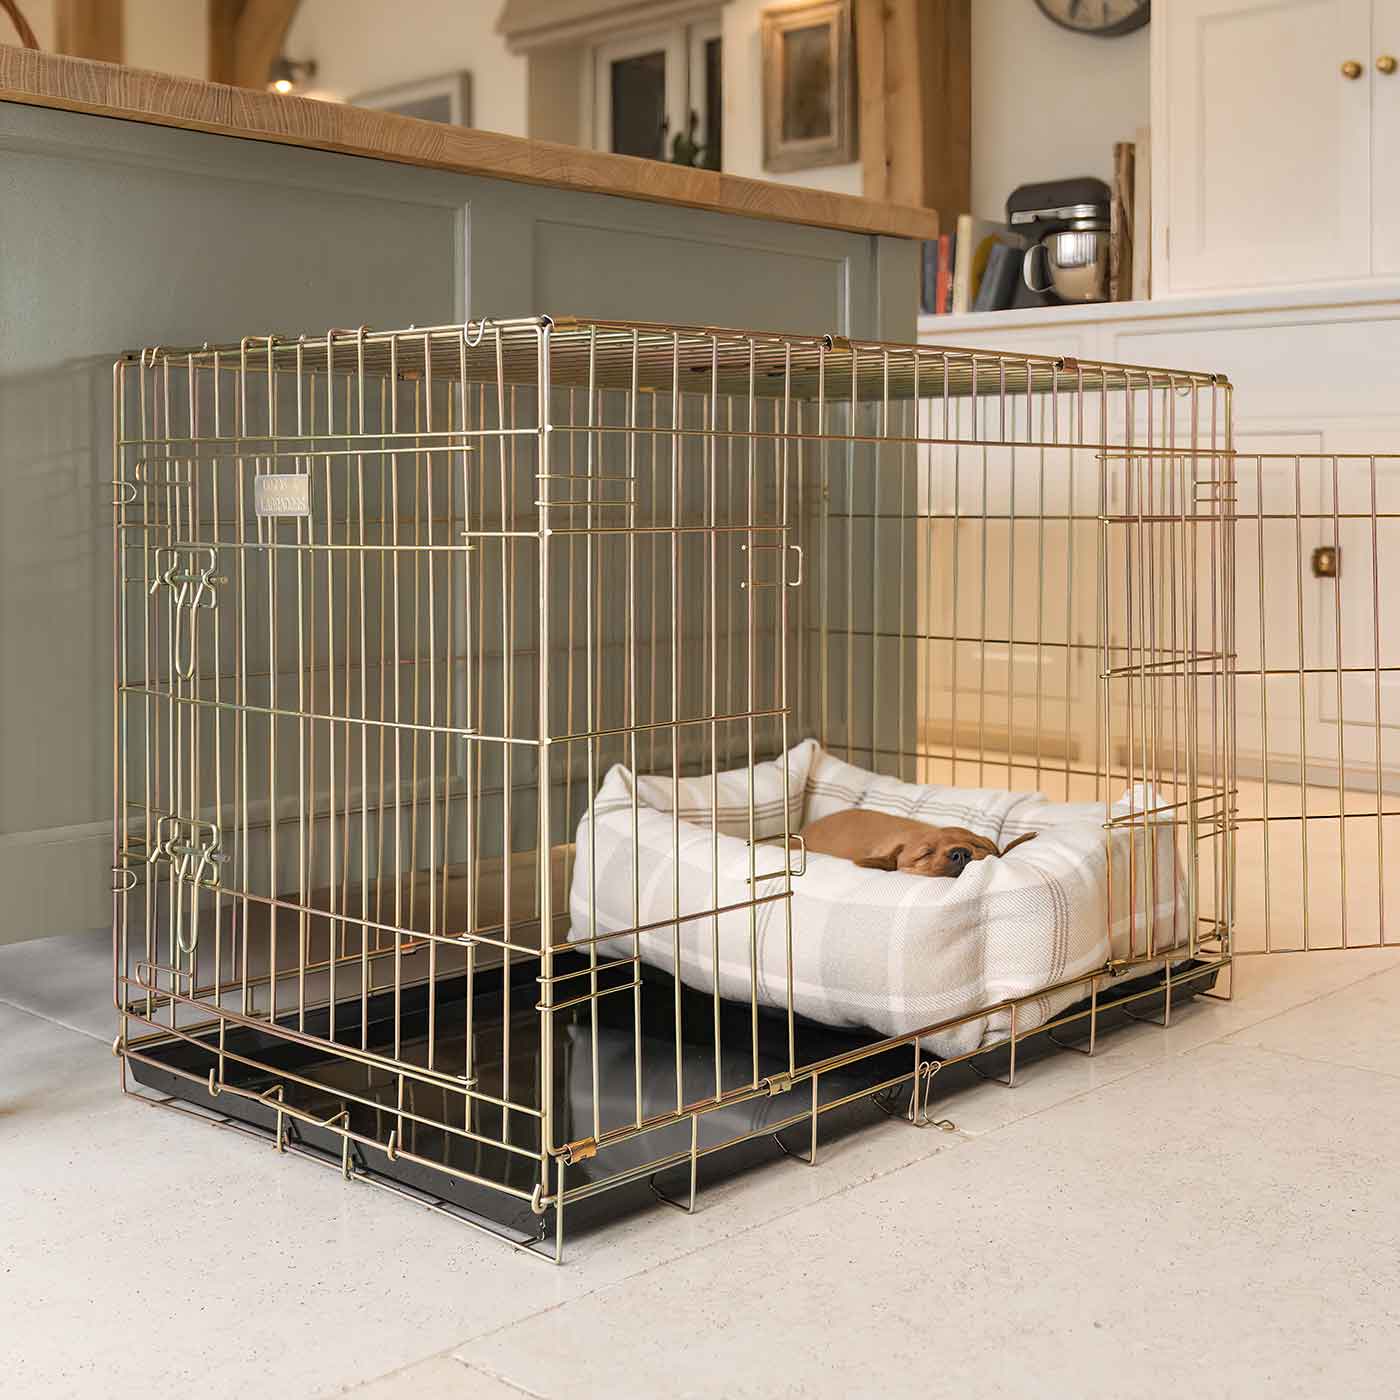  Cosy & Calm Puppy Crate Bed, The Perfect Dog Crate Accessory For The Ultimate Dog Den! In Stunning Natural Tweed! Available Now at Lords & Labradors